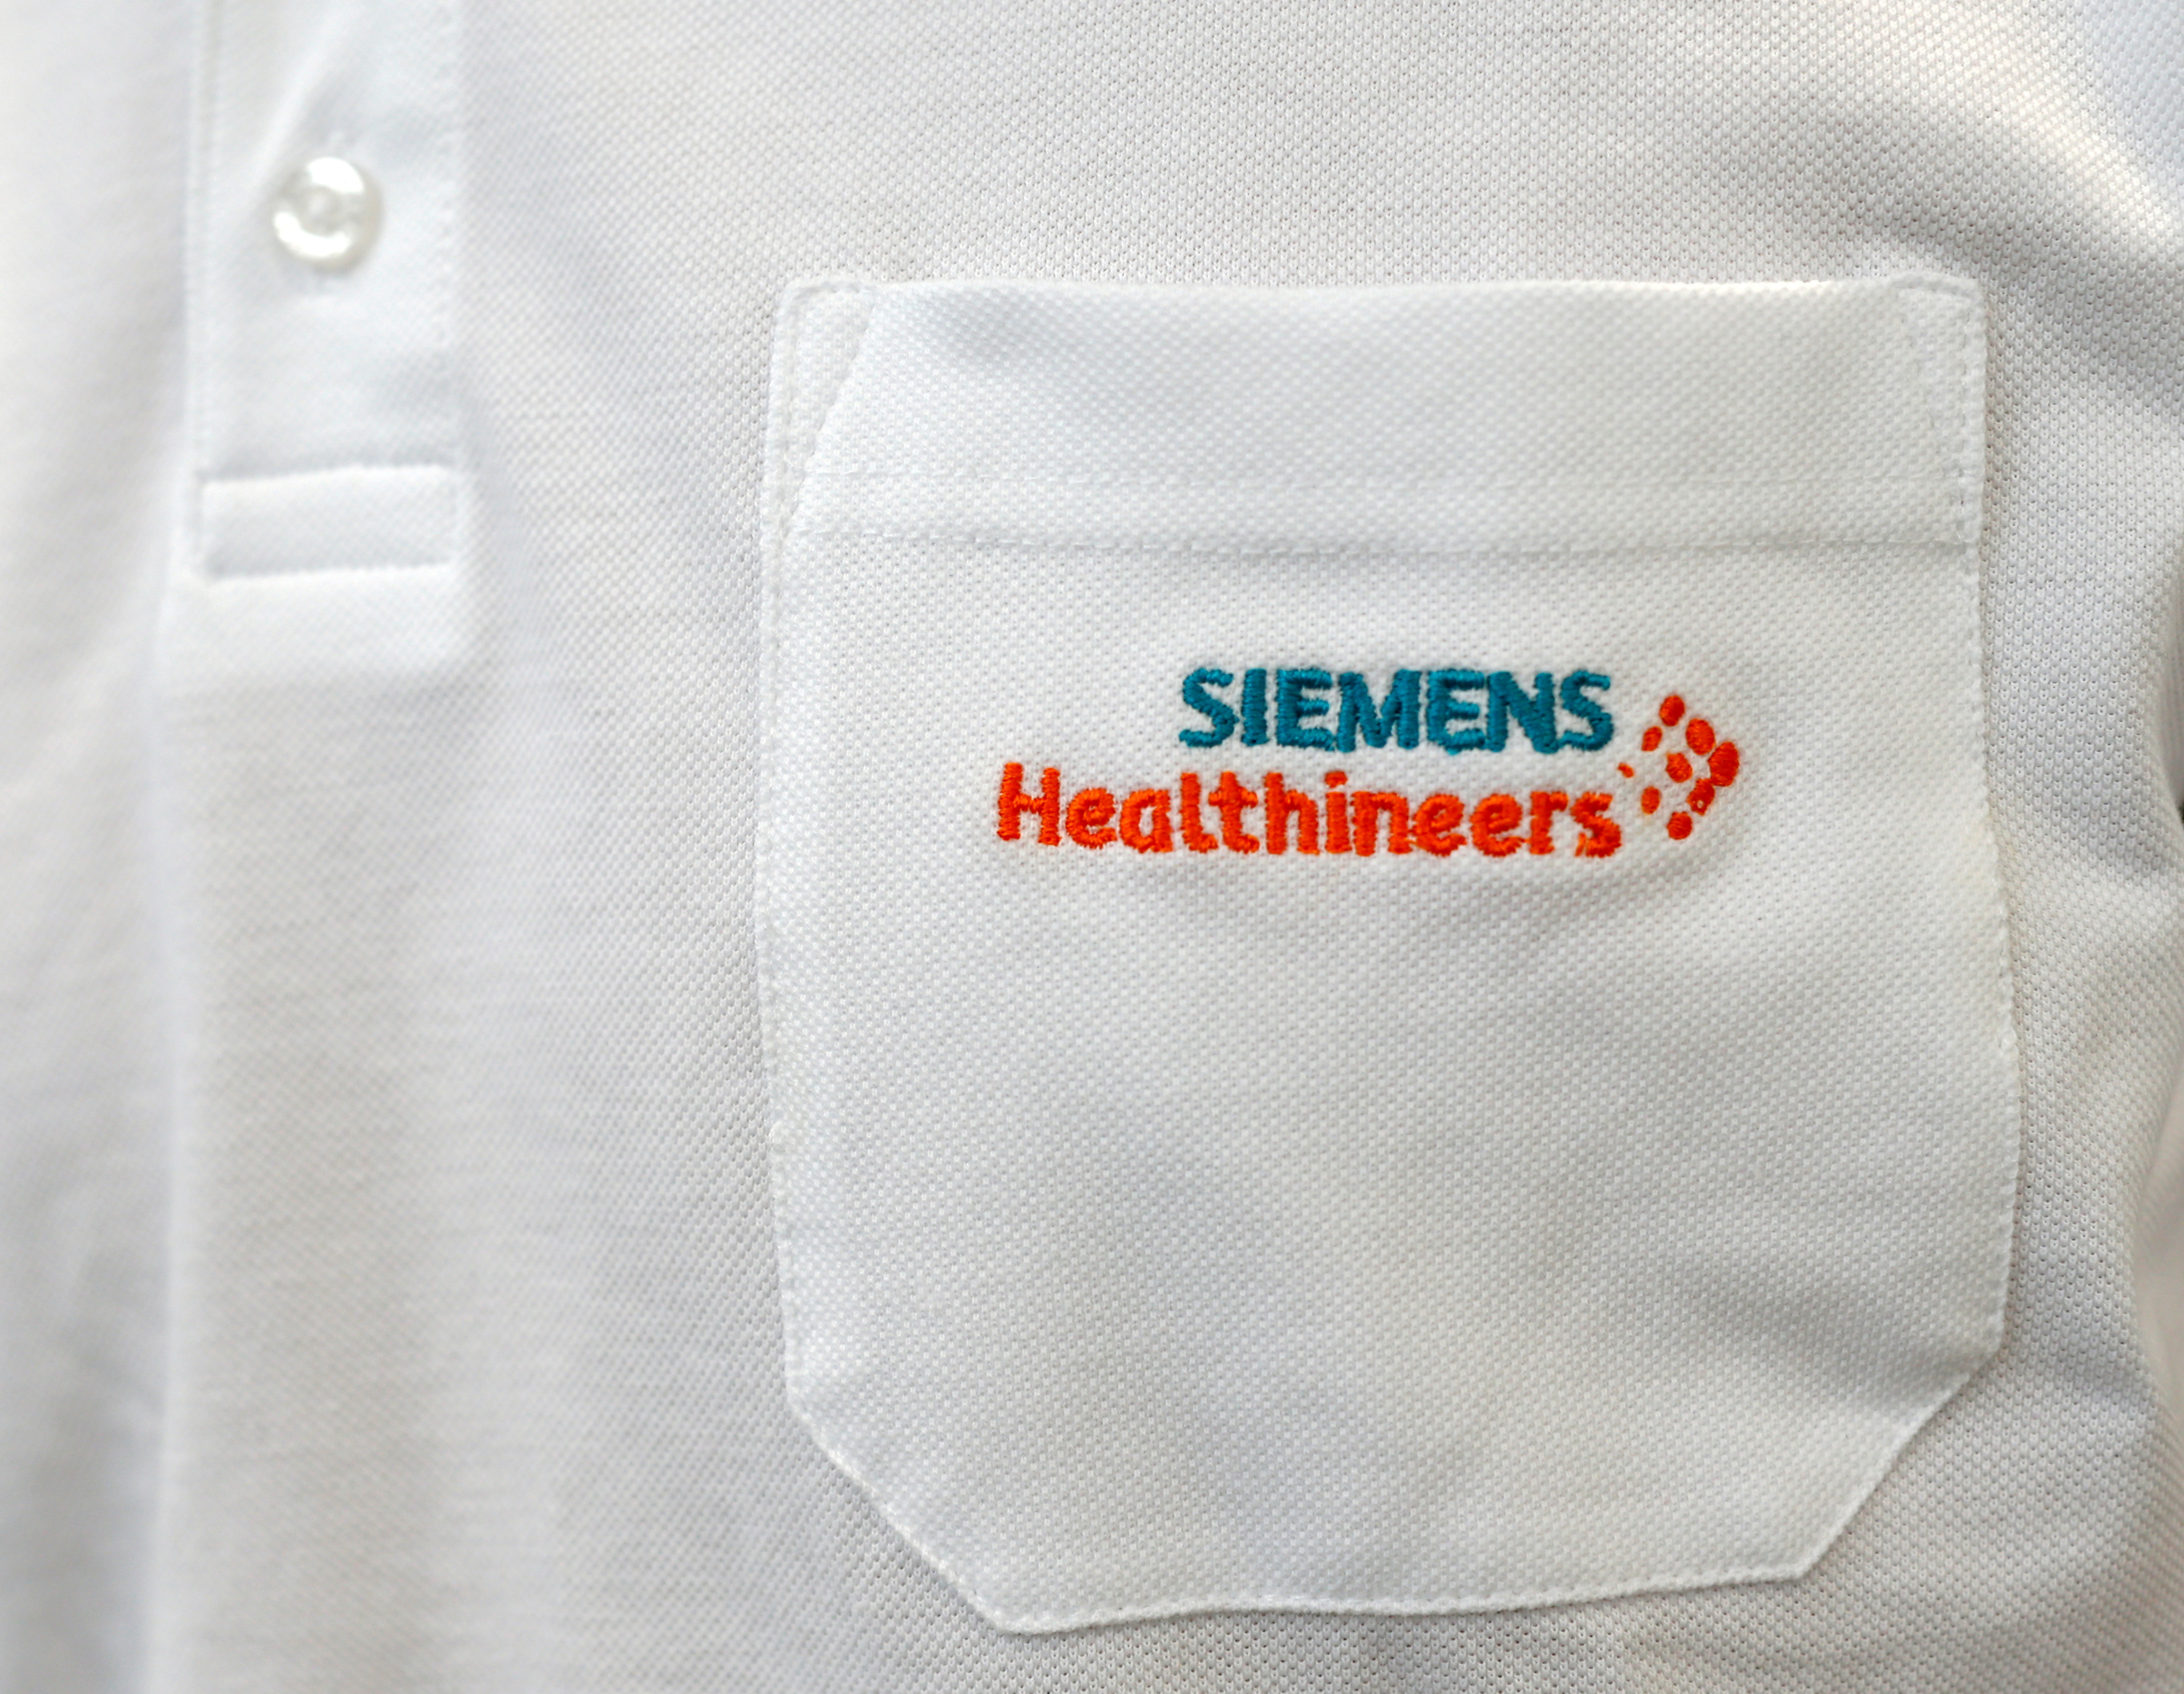 FILE PHOTO: Siemens Healthineers logo is seen on an item of clothing in manufacturing plant in Forchheim